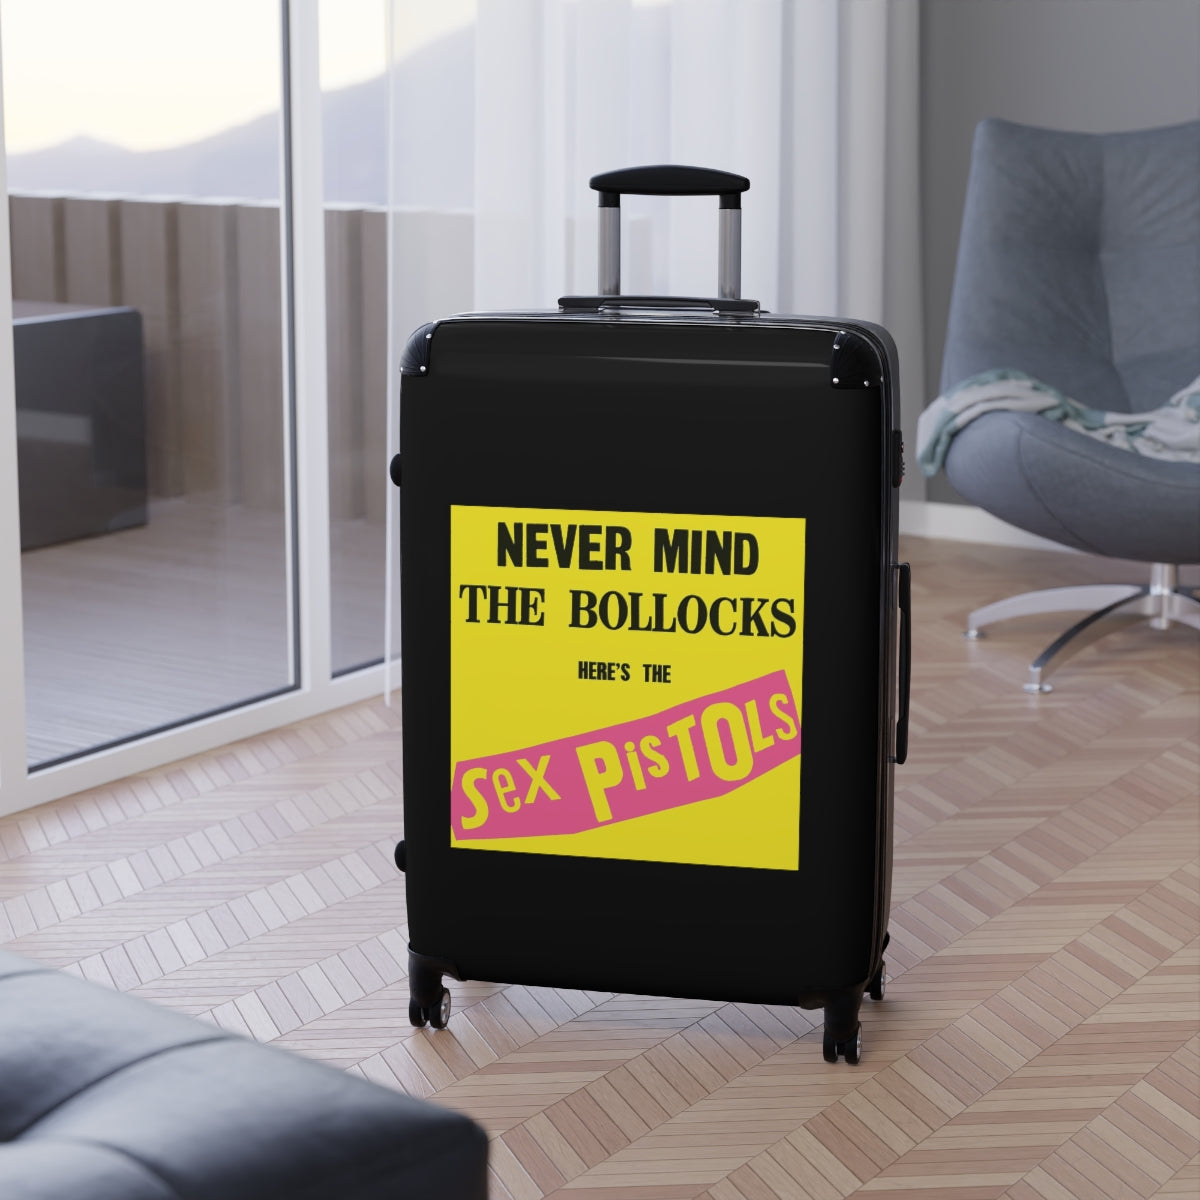 Getrott Sex Pistols Never Mind the Bollocks 1977 Black Cabin Suitcase Extended Storage Adjustable Telescopic Handle Double wheeled Polycarbonate Hard-shell Built-in Lock-Bags-Geotrott